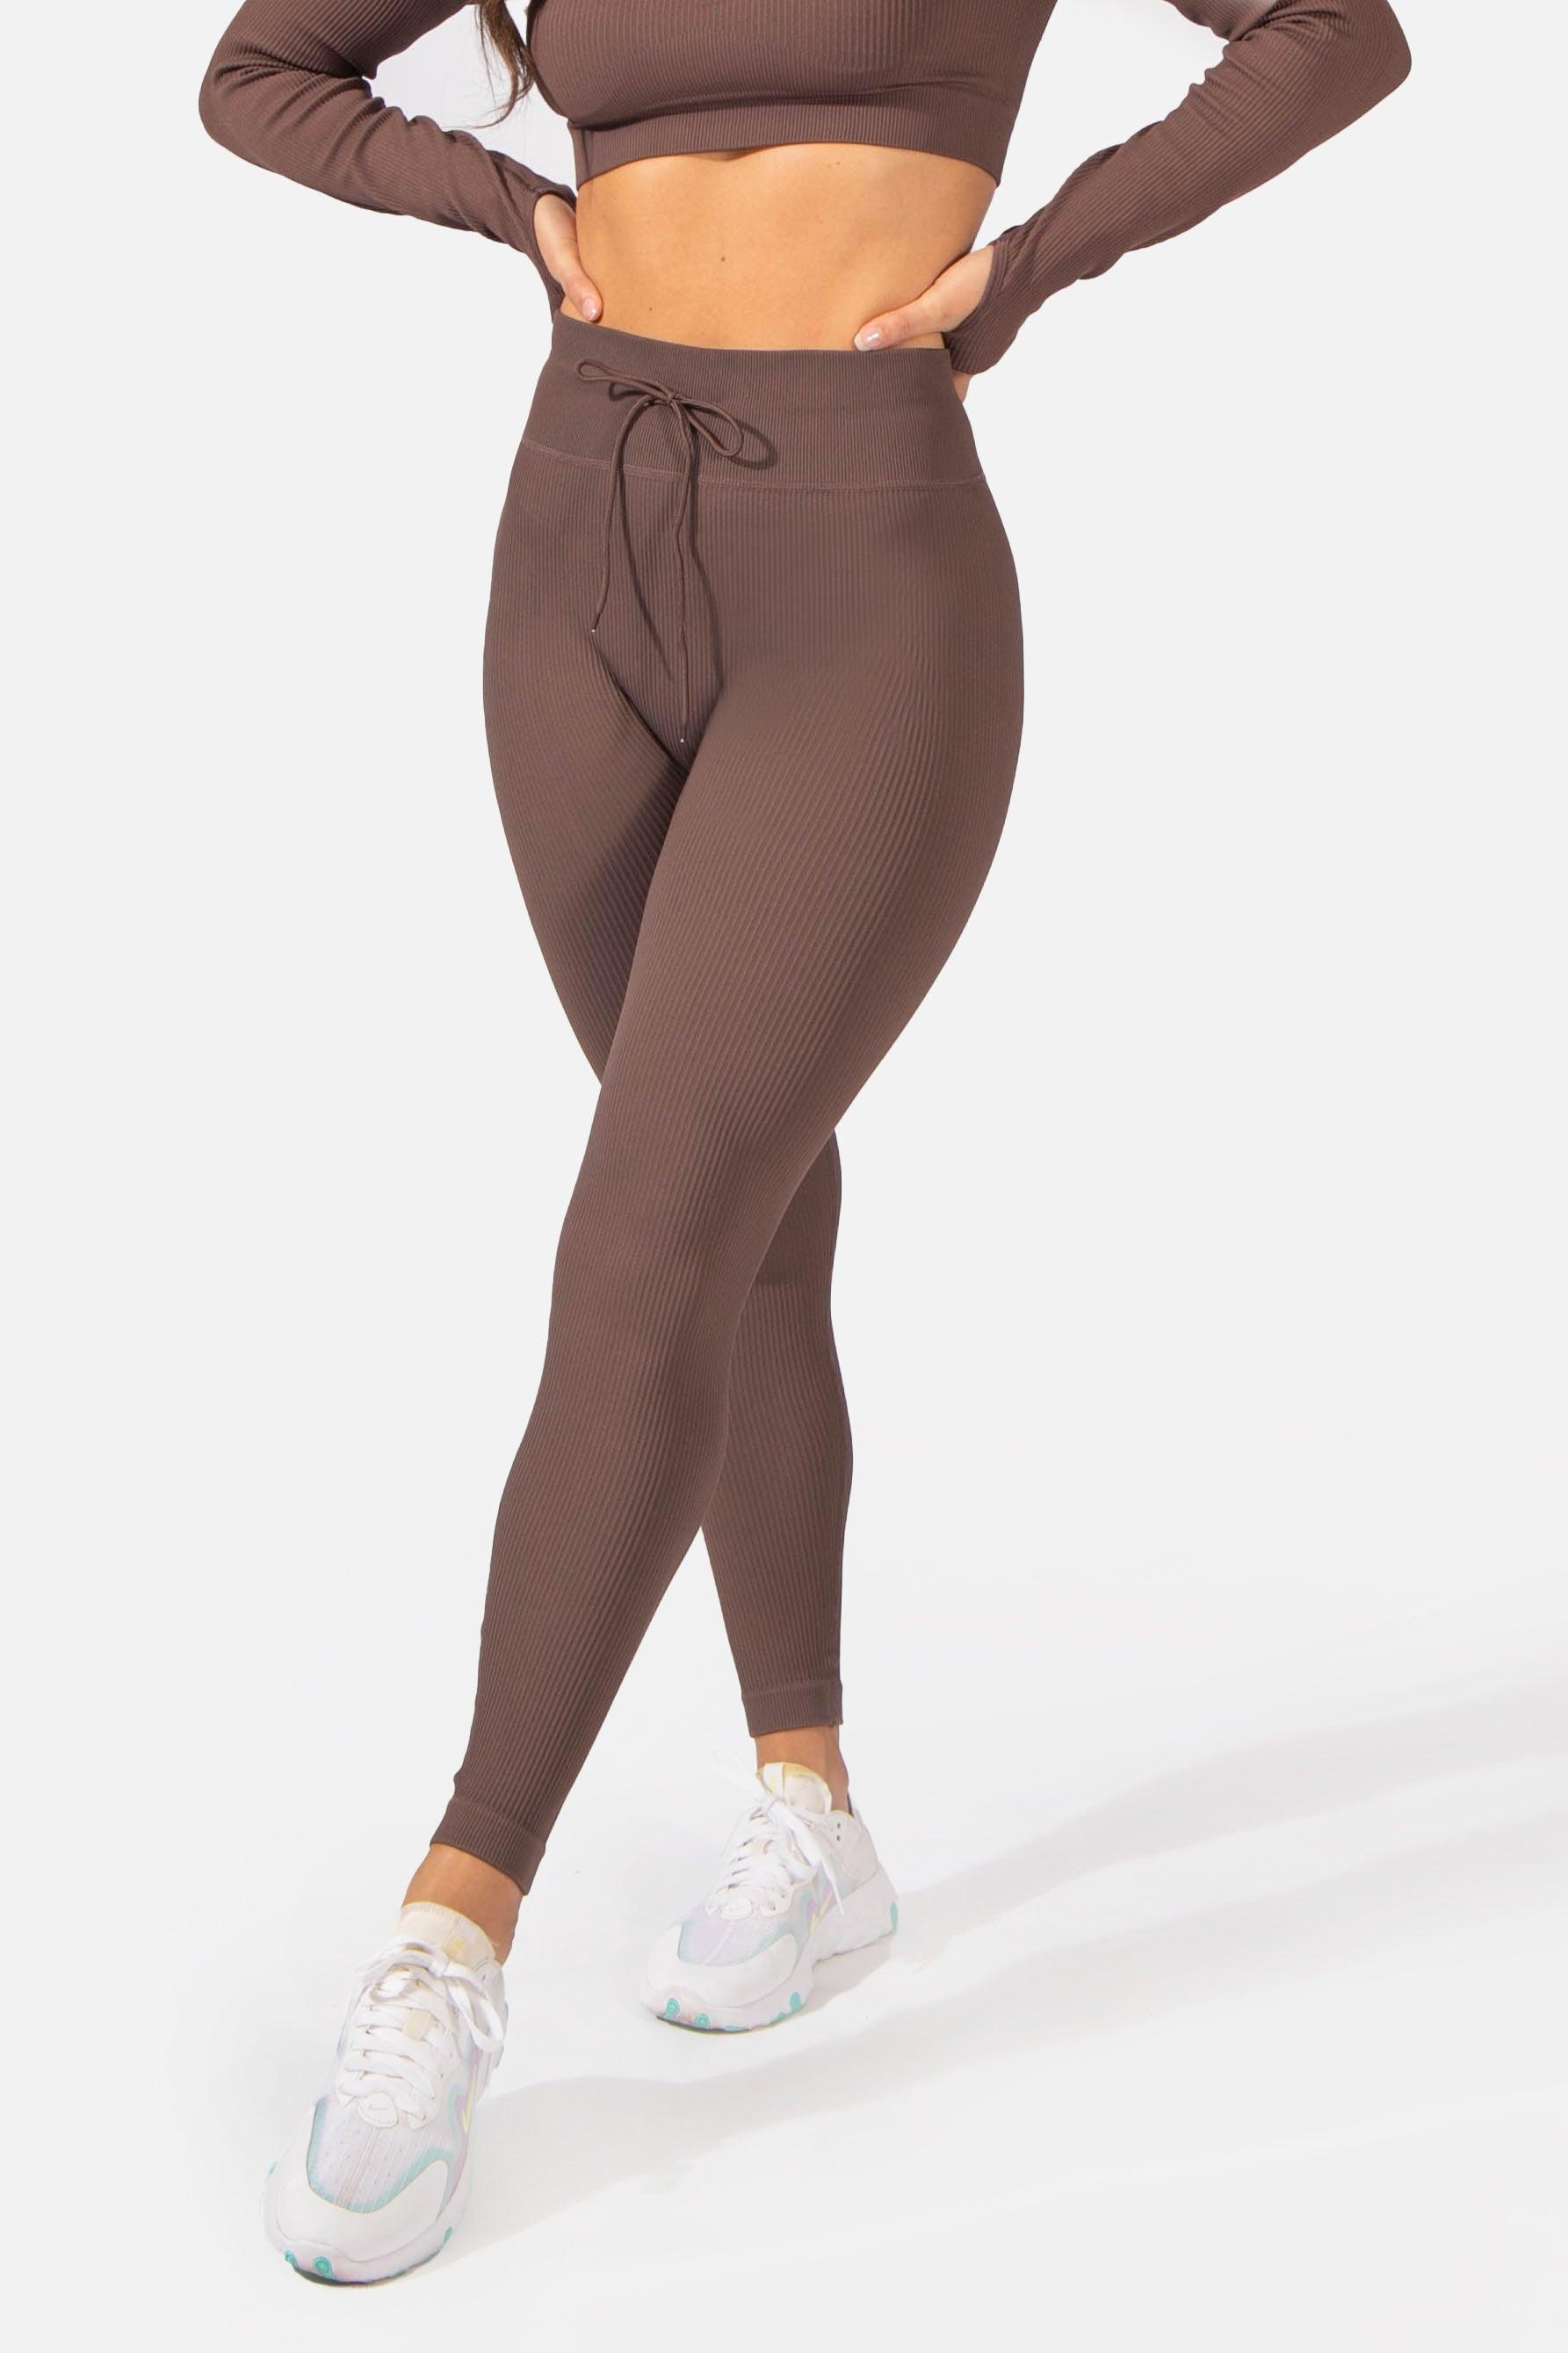 Skin Colored Stretchy Leggings AOP Spicy Mix Brown. 